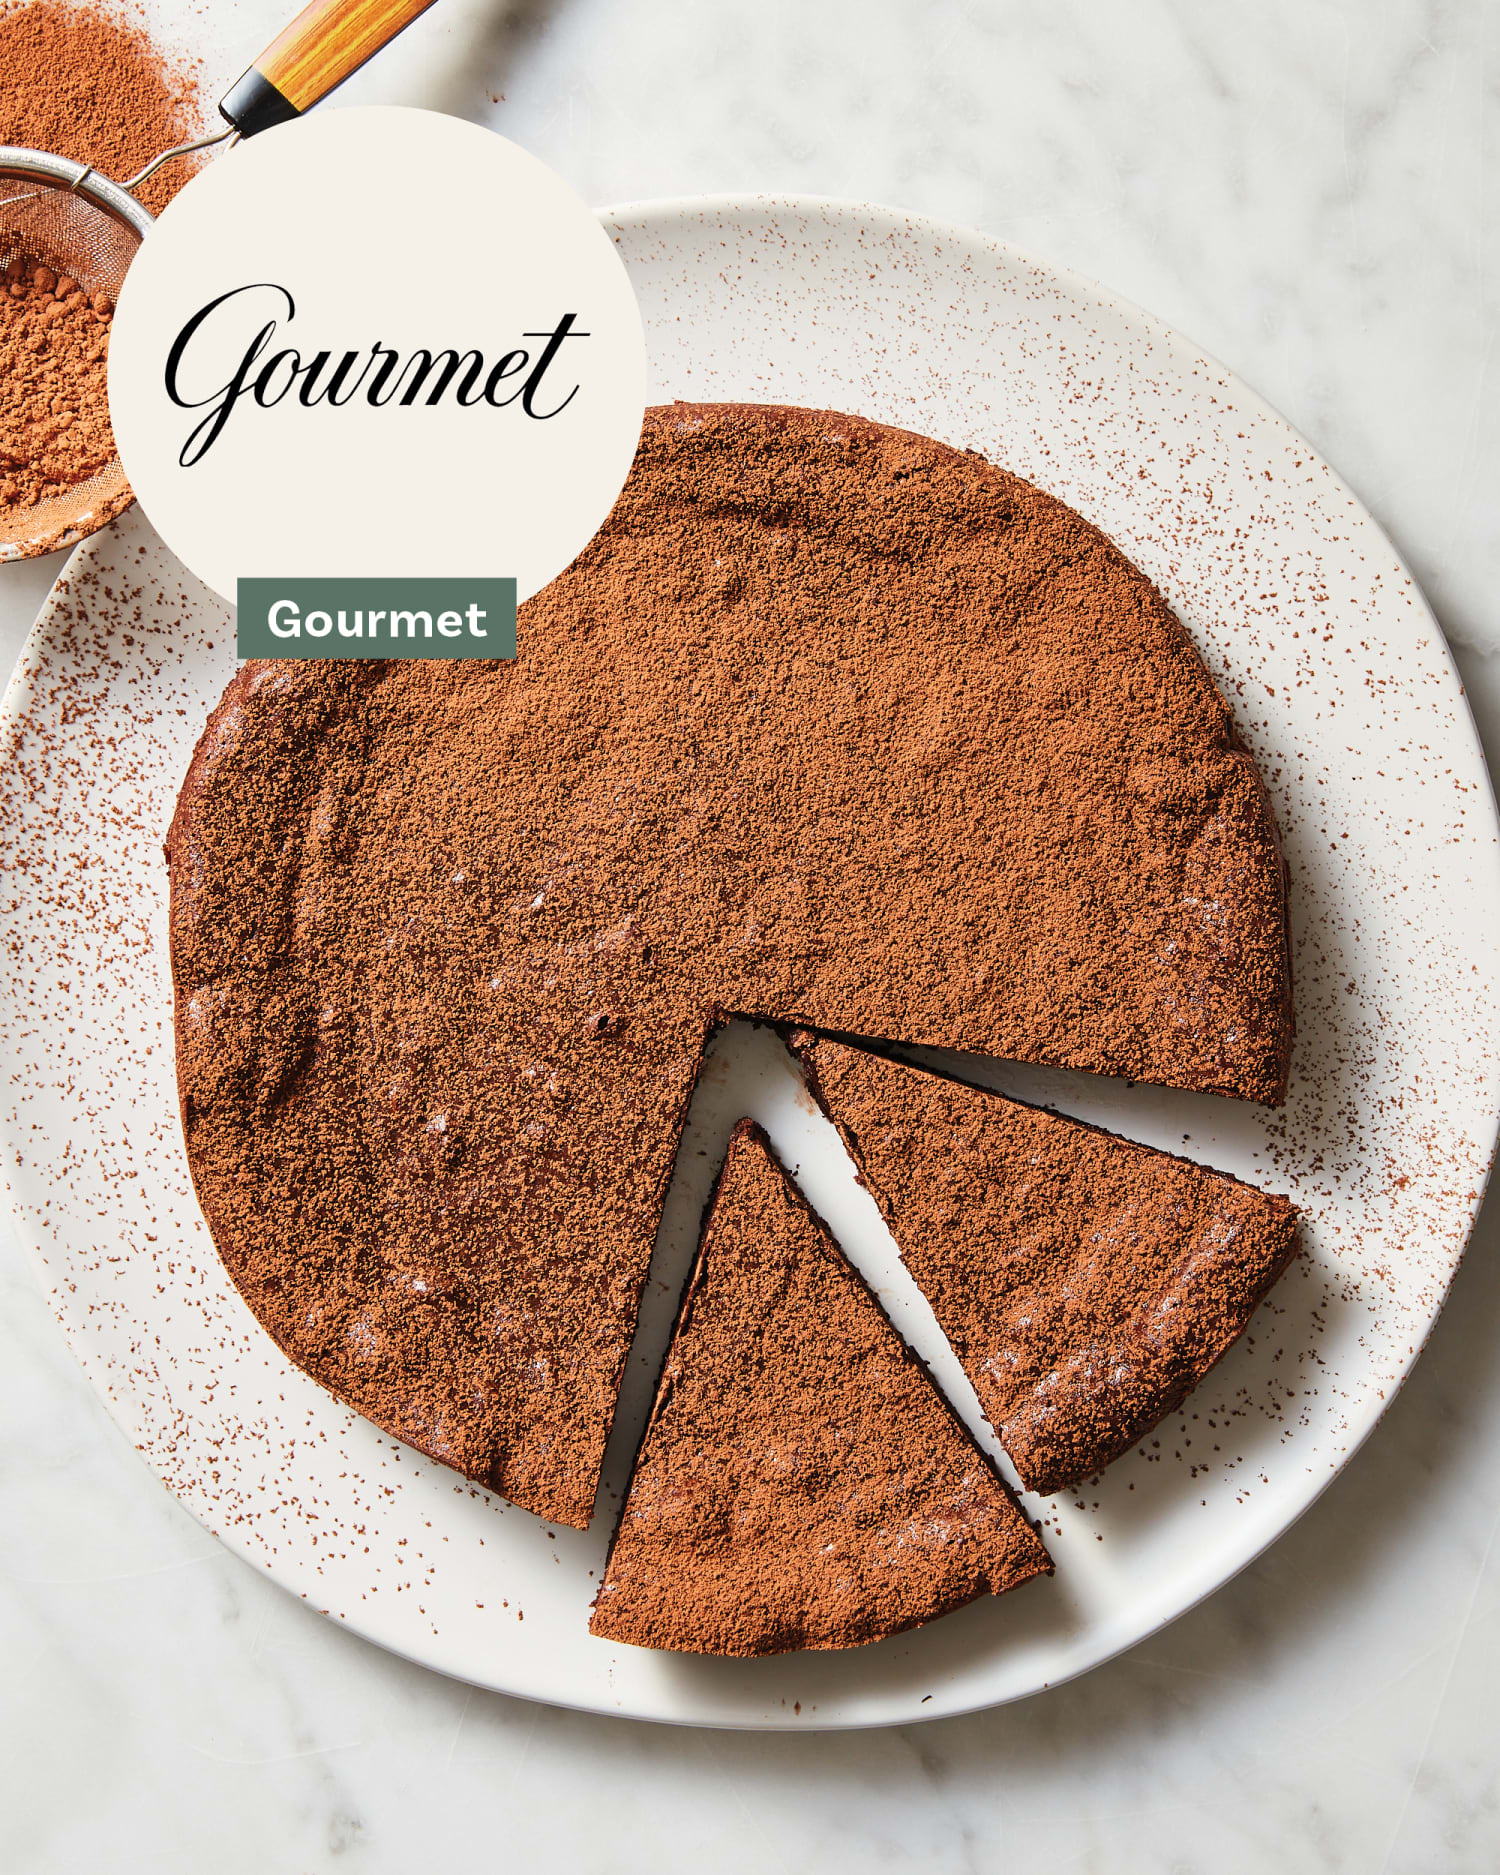 Gourmet’s Flourless Chocolate Cake Has Been a Winner for Over 25 Years